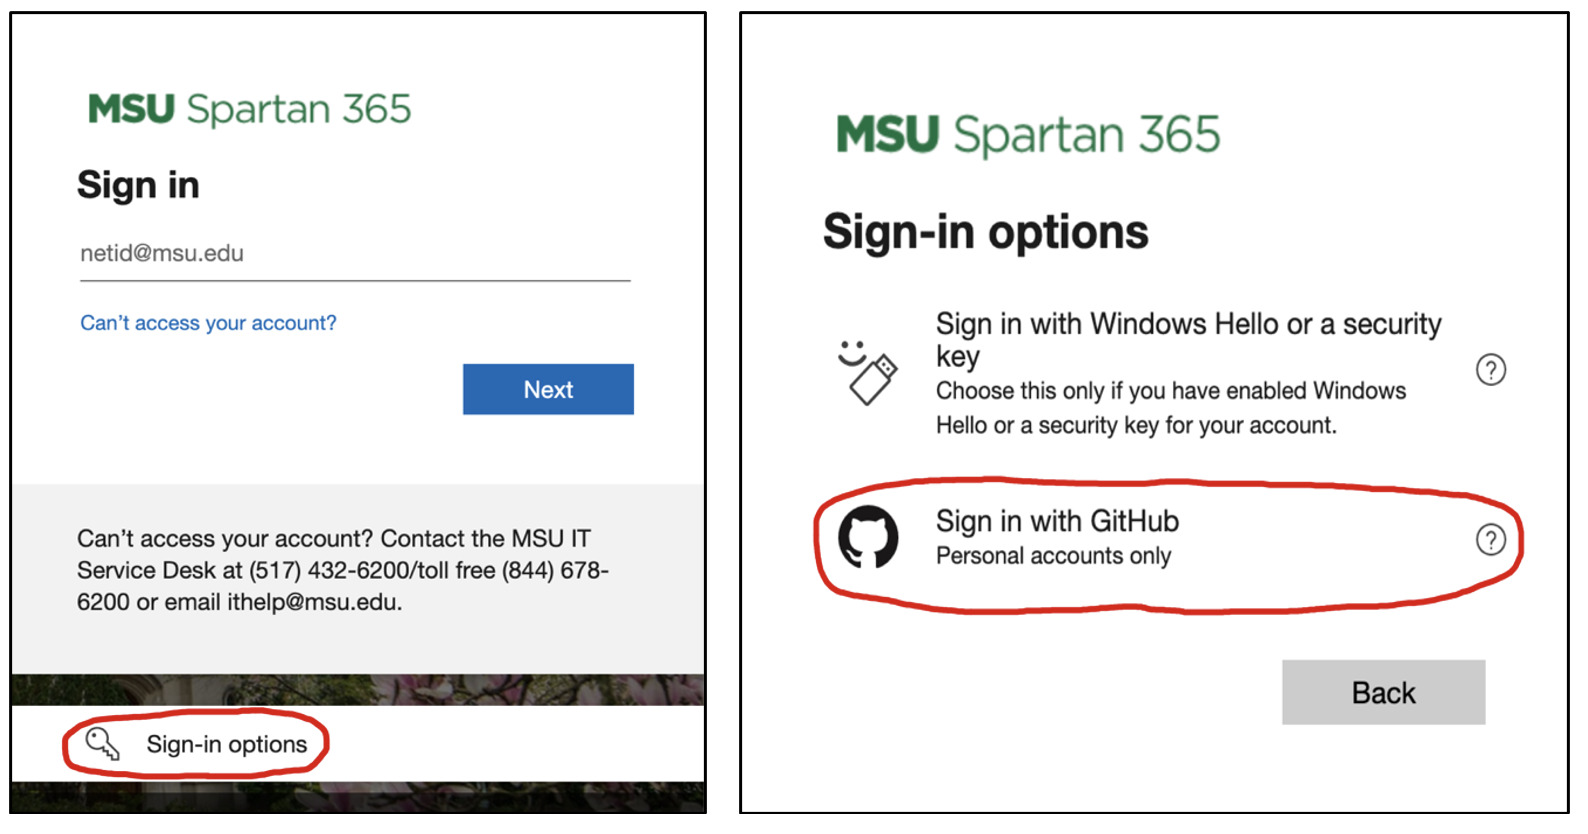 images of off-campus sign-in (left) and GitHub sign-in (right).